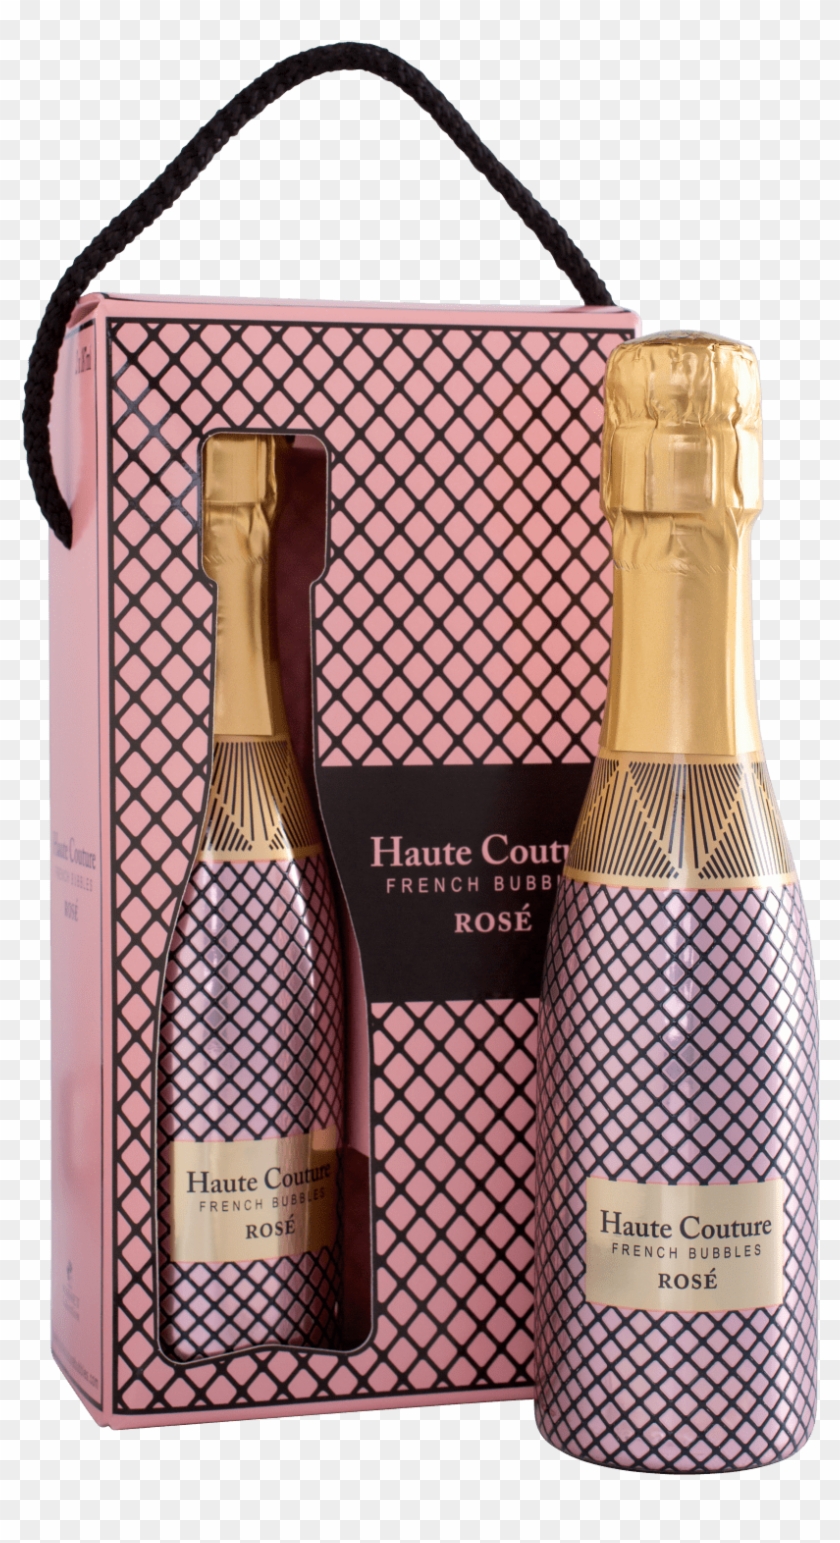 Our Friends At Boisset Are Out With Two New Sparkling - Haute Couture French Bubbles Rose Clipart